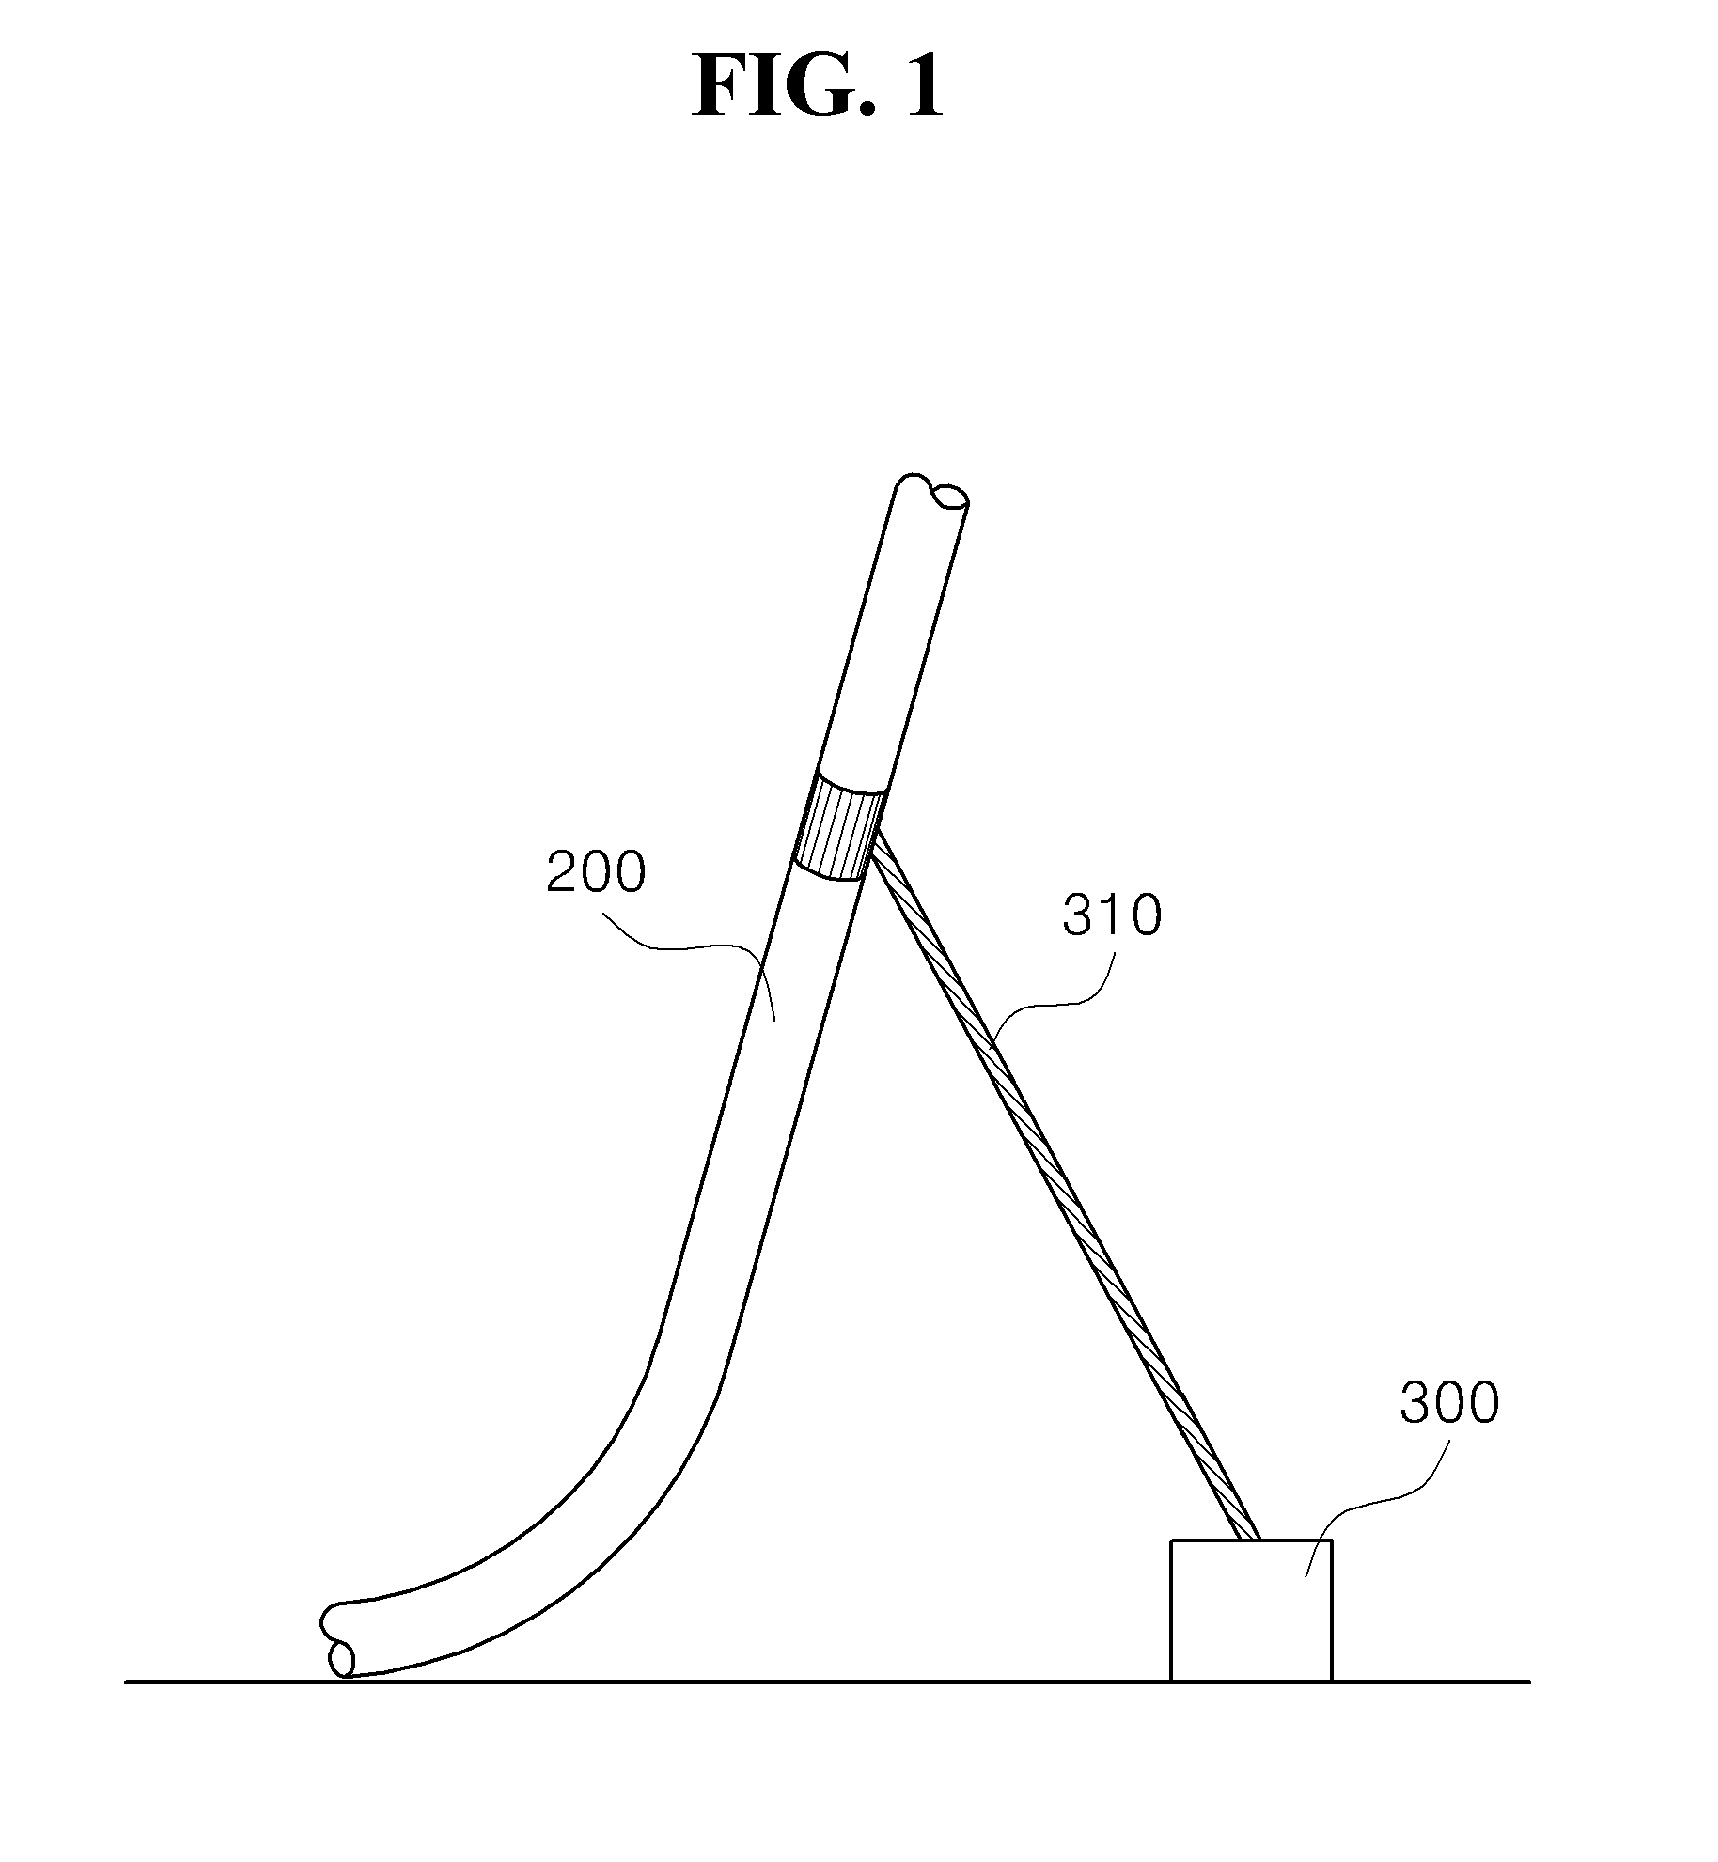 System and method for providing information on fuel savings, safe operation, and maintenance by real-time predictive monitoring and predictive controlling of aerodynamic and hydrodynamic environmental internal/external forces, hull stresses, motion with six degrees of freedom, and the location of marine structure